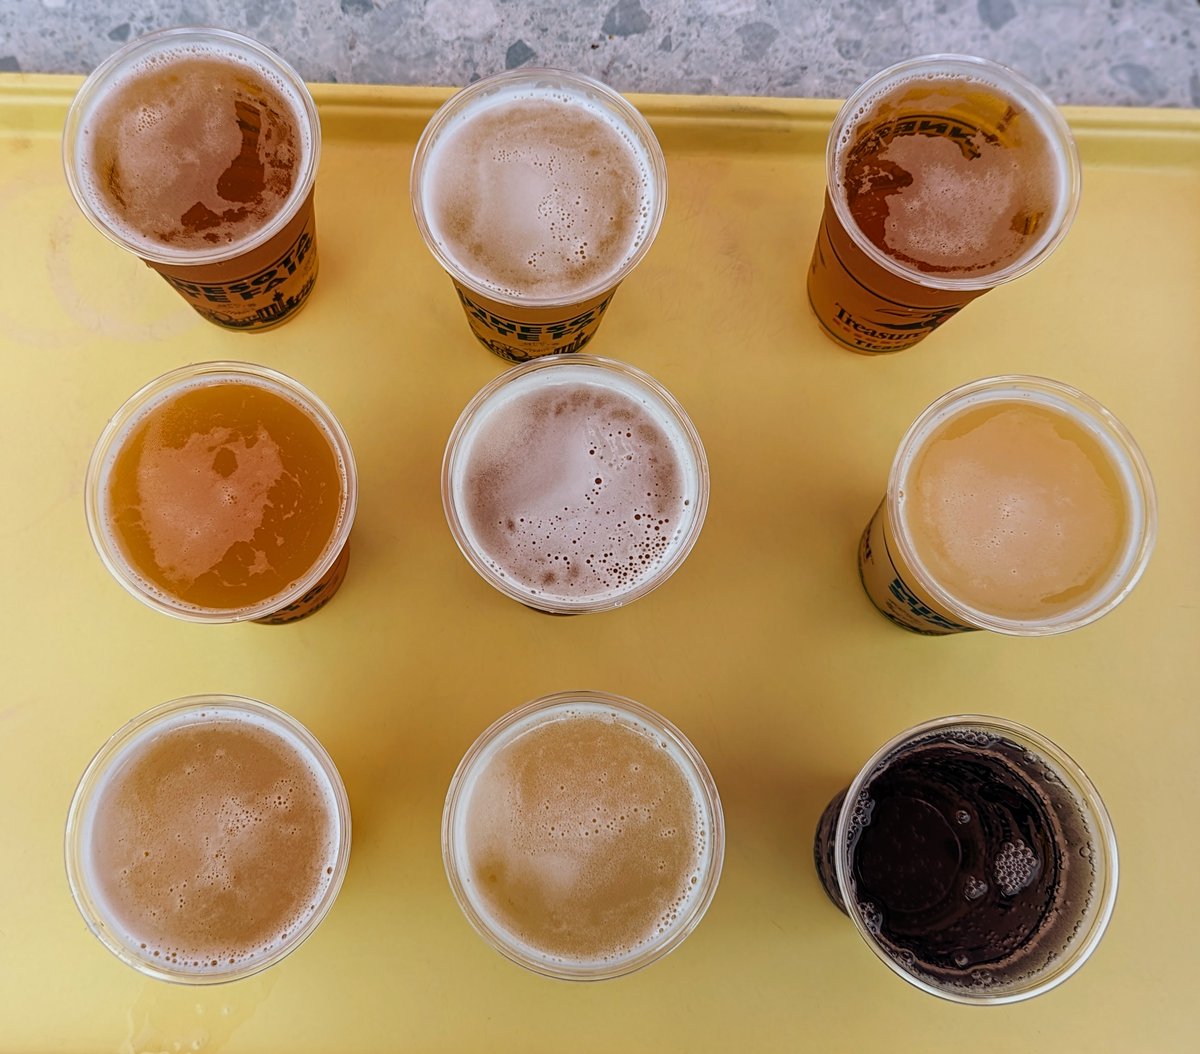 With 25 craft options, including 16 specialties only available at the Ball Park, you've got options. What are you coming by to try? #mnbeer #MNstatefair